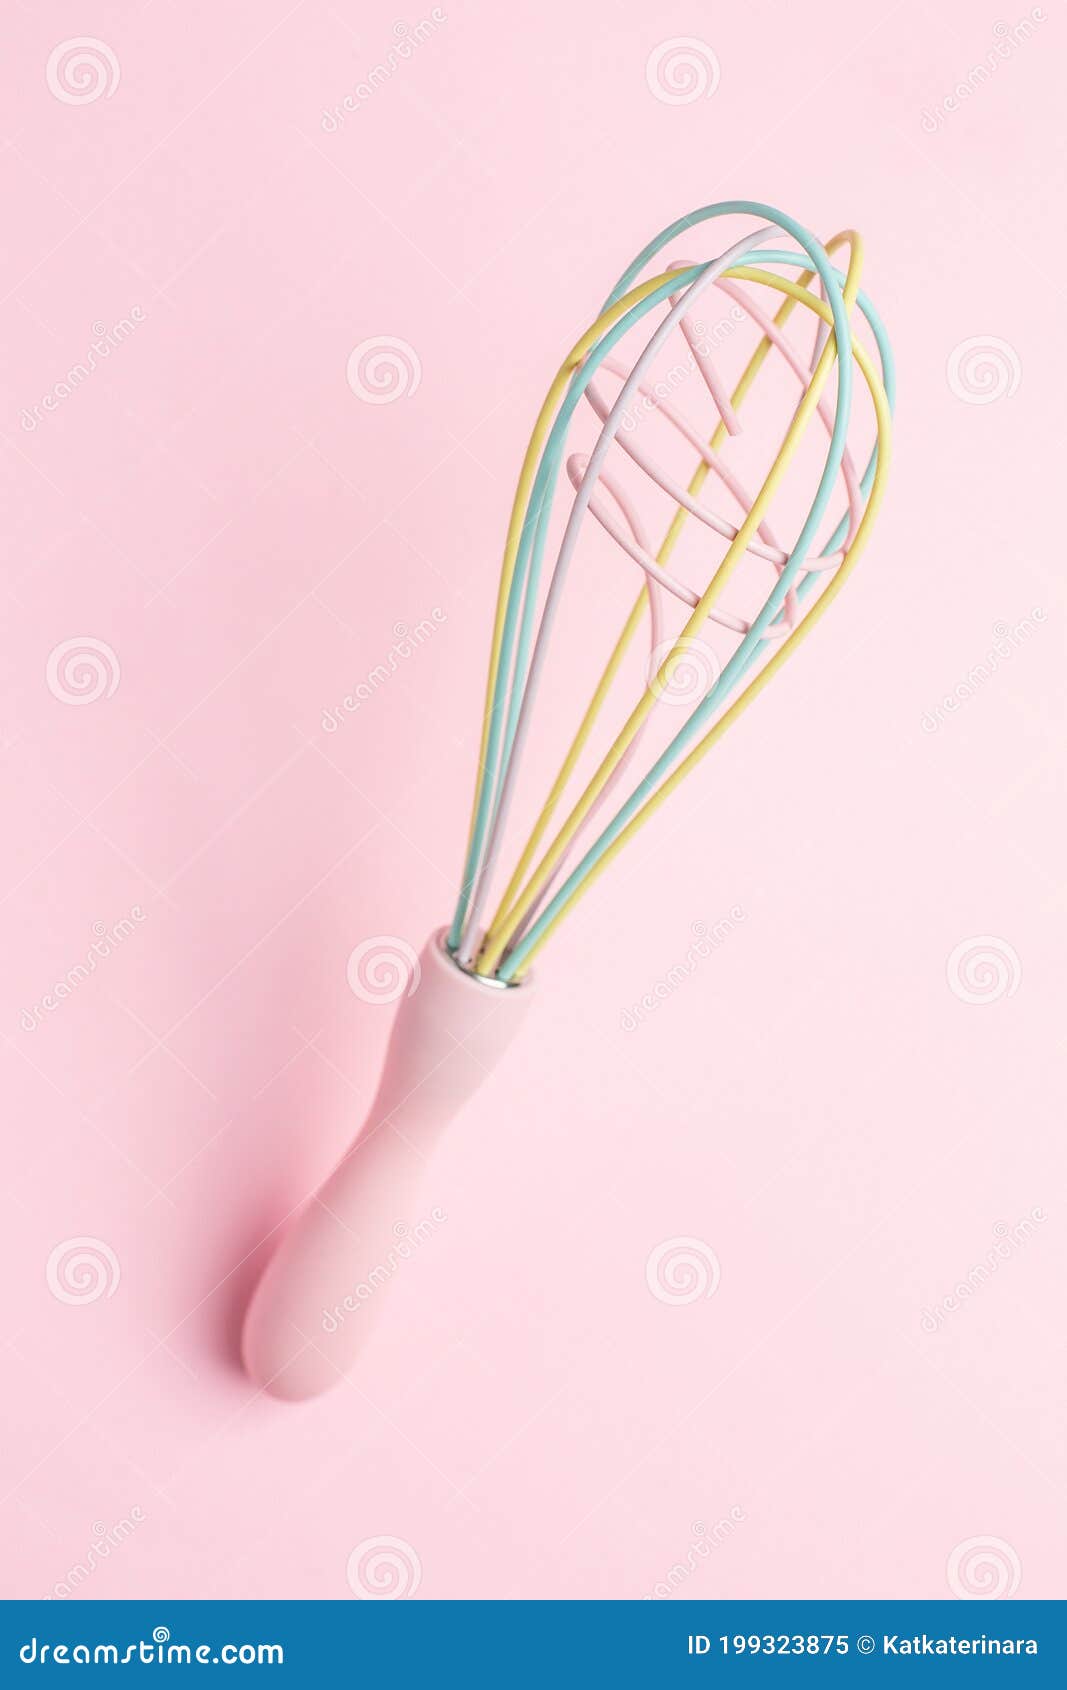 Multi-colored pastel kitchen whisk on pink background, cute kitchen utensils,  feminine cooking Stock Photo by sablyaekaterina